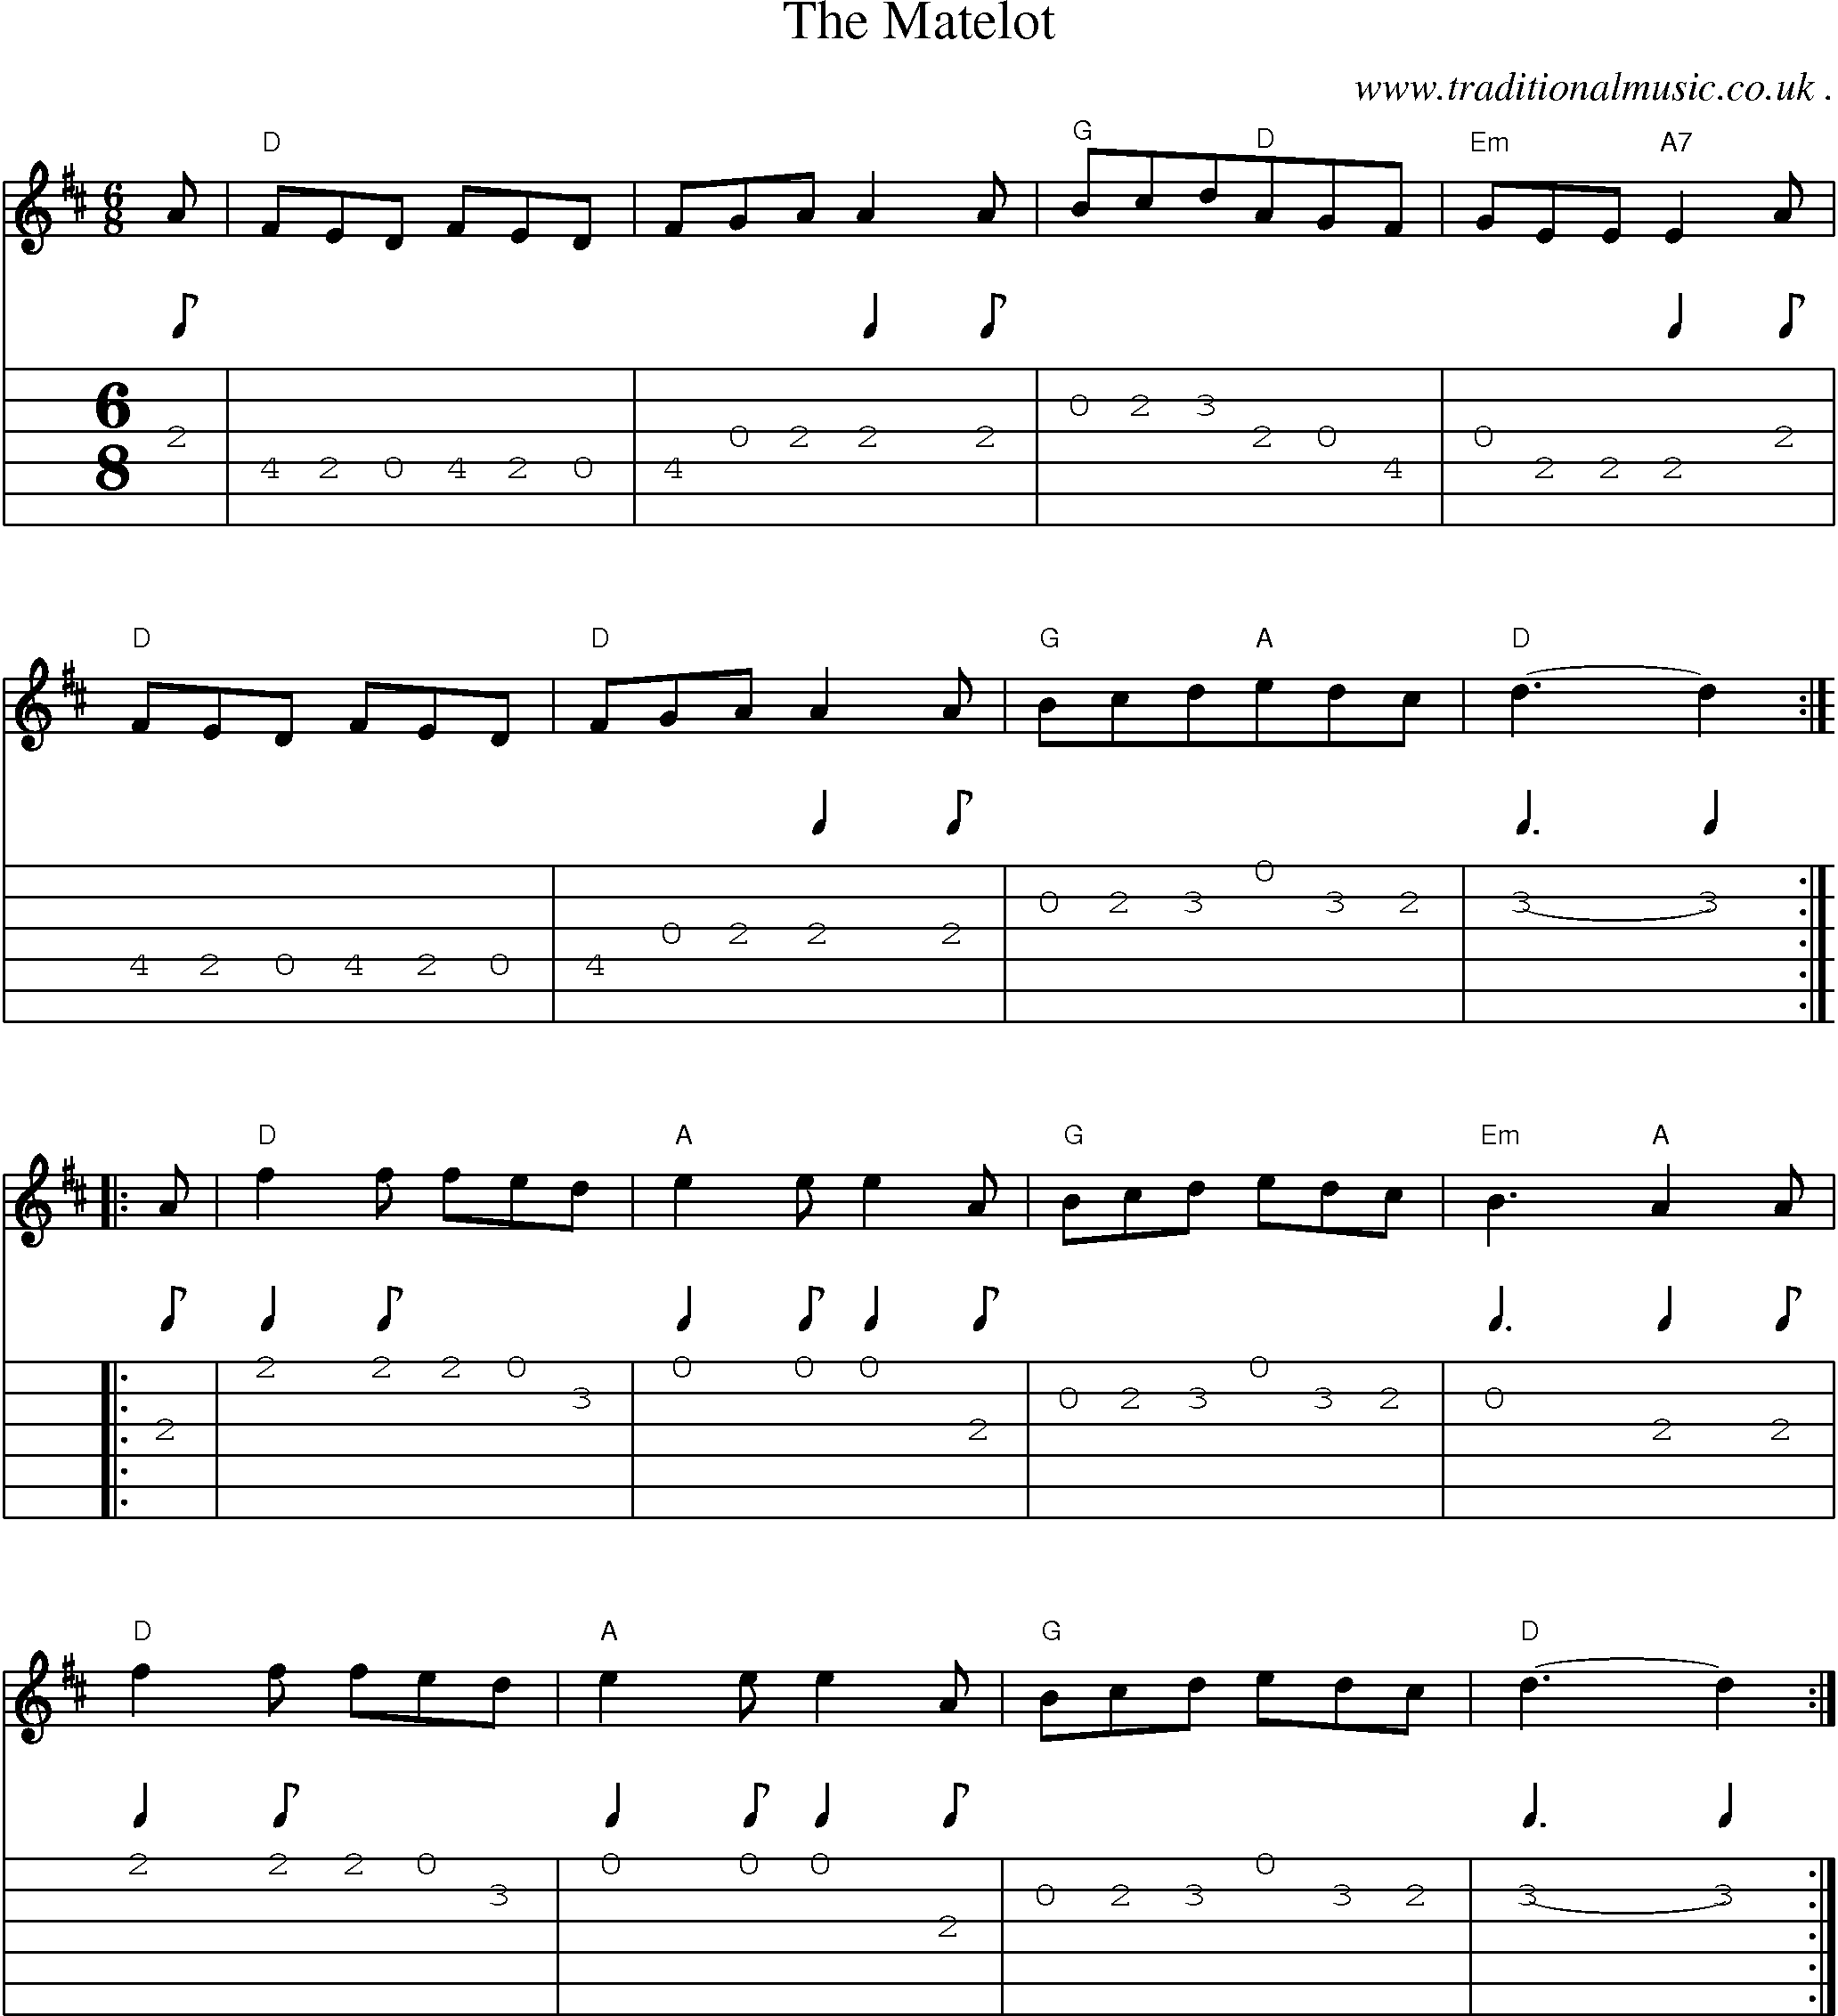 Sheet-Music and Guitar Tabs for The Matelot